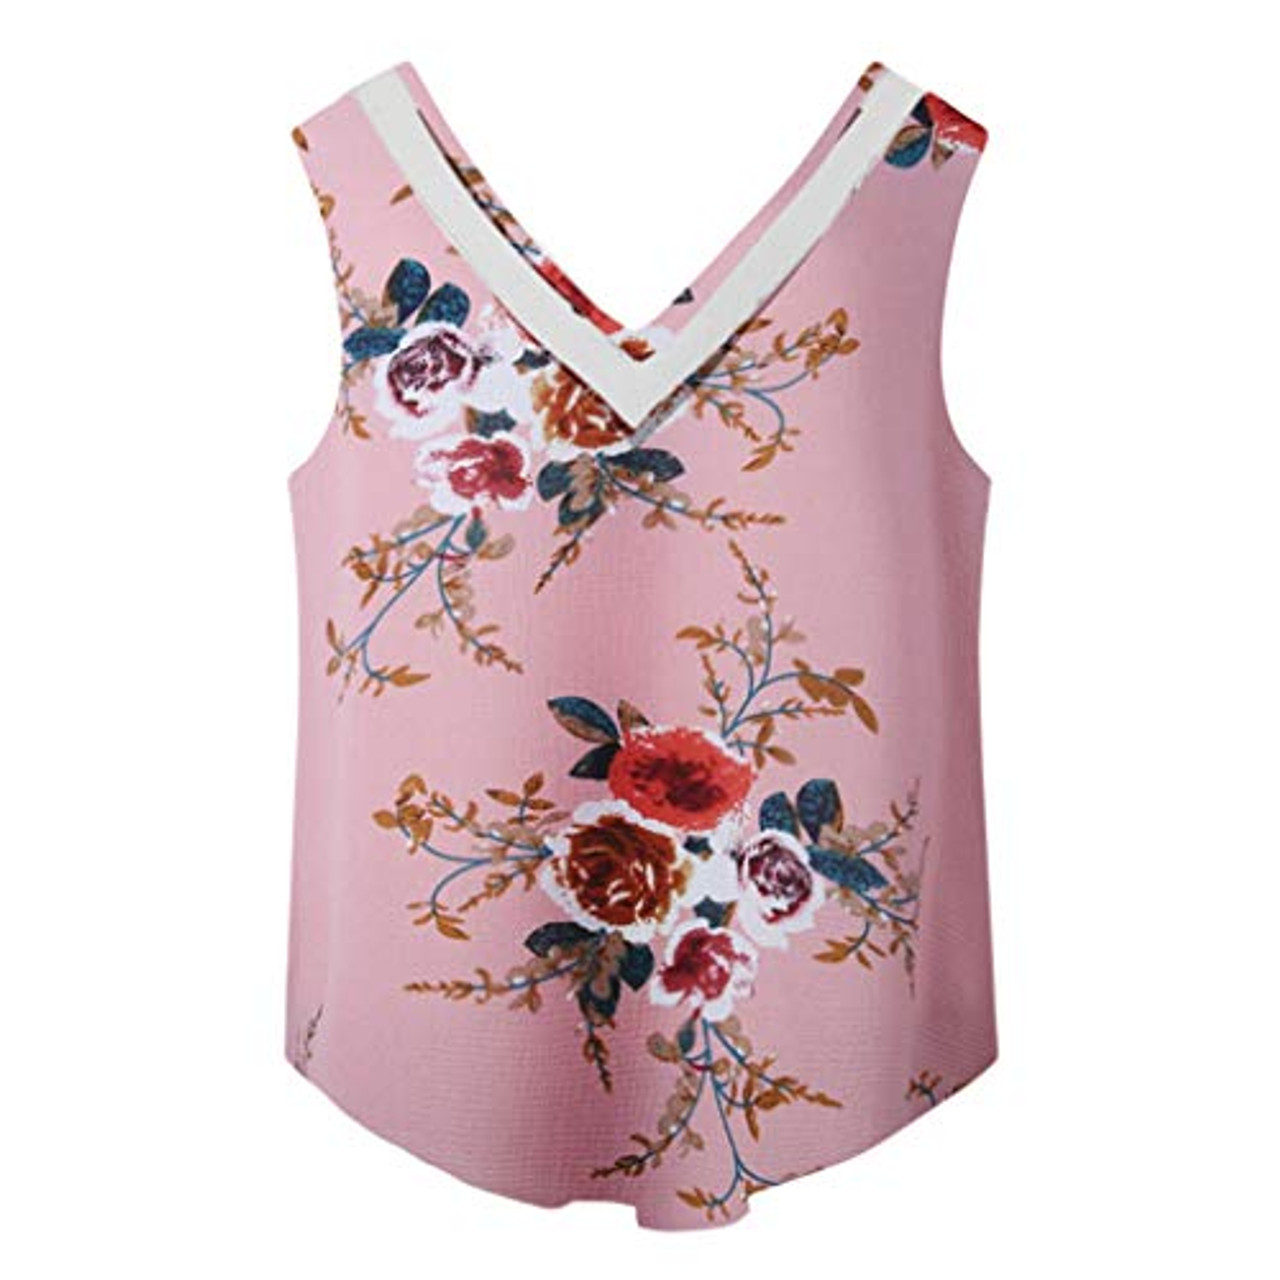 XL, Pink NREALY Blusa Womens Floral Casual Sleeveless Crop Top Vest Tank Shirt Blouse Cami Top 